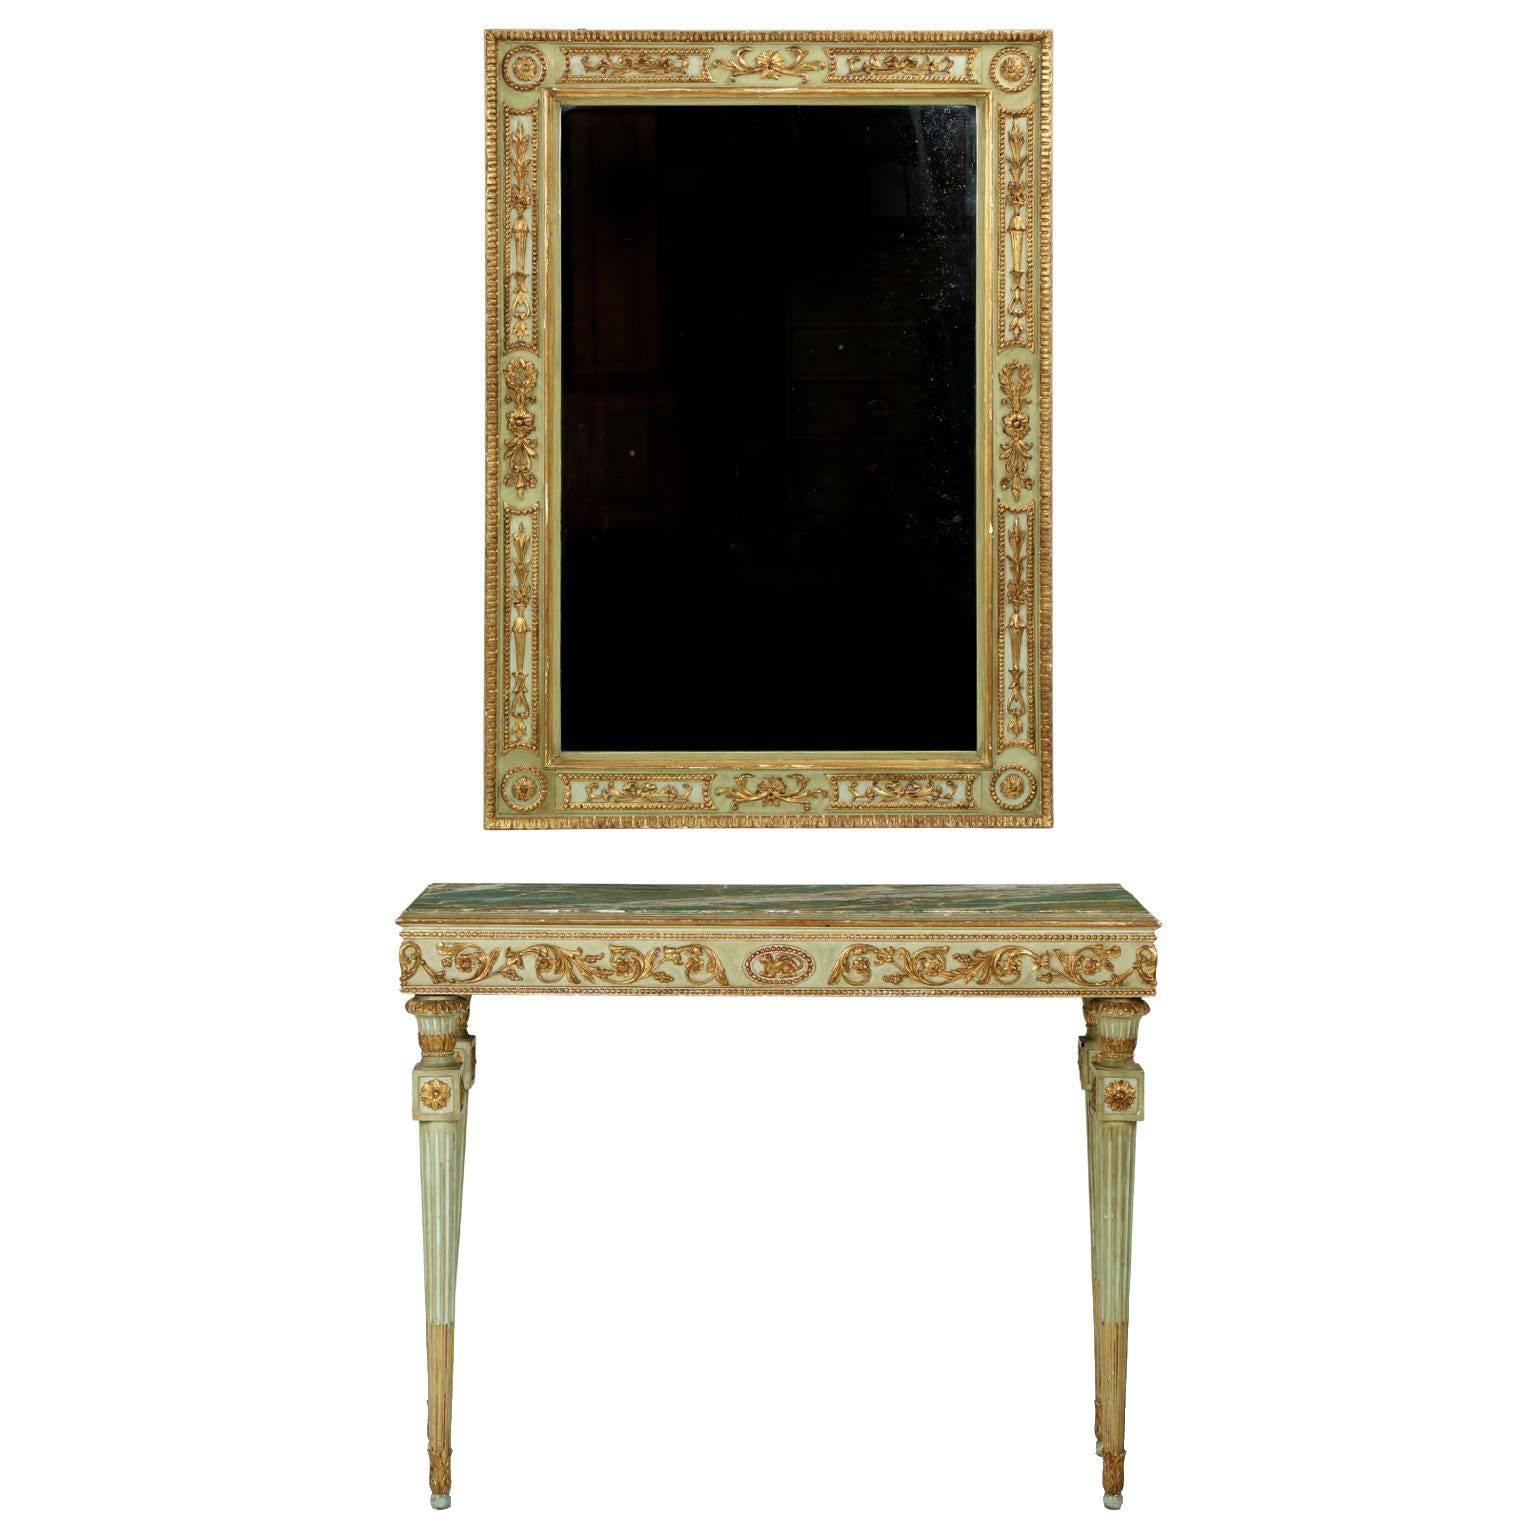 French Louis XVI Style Green Painted Antique Marble-Top Console Table and Mirror